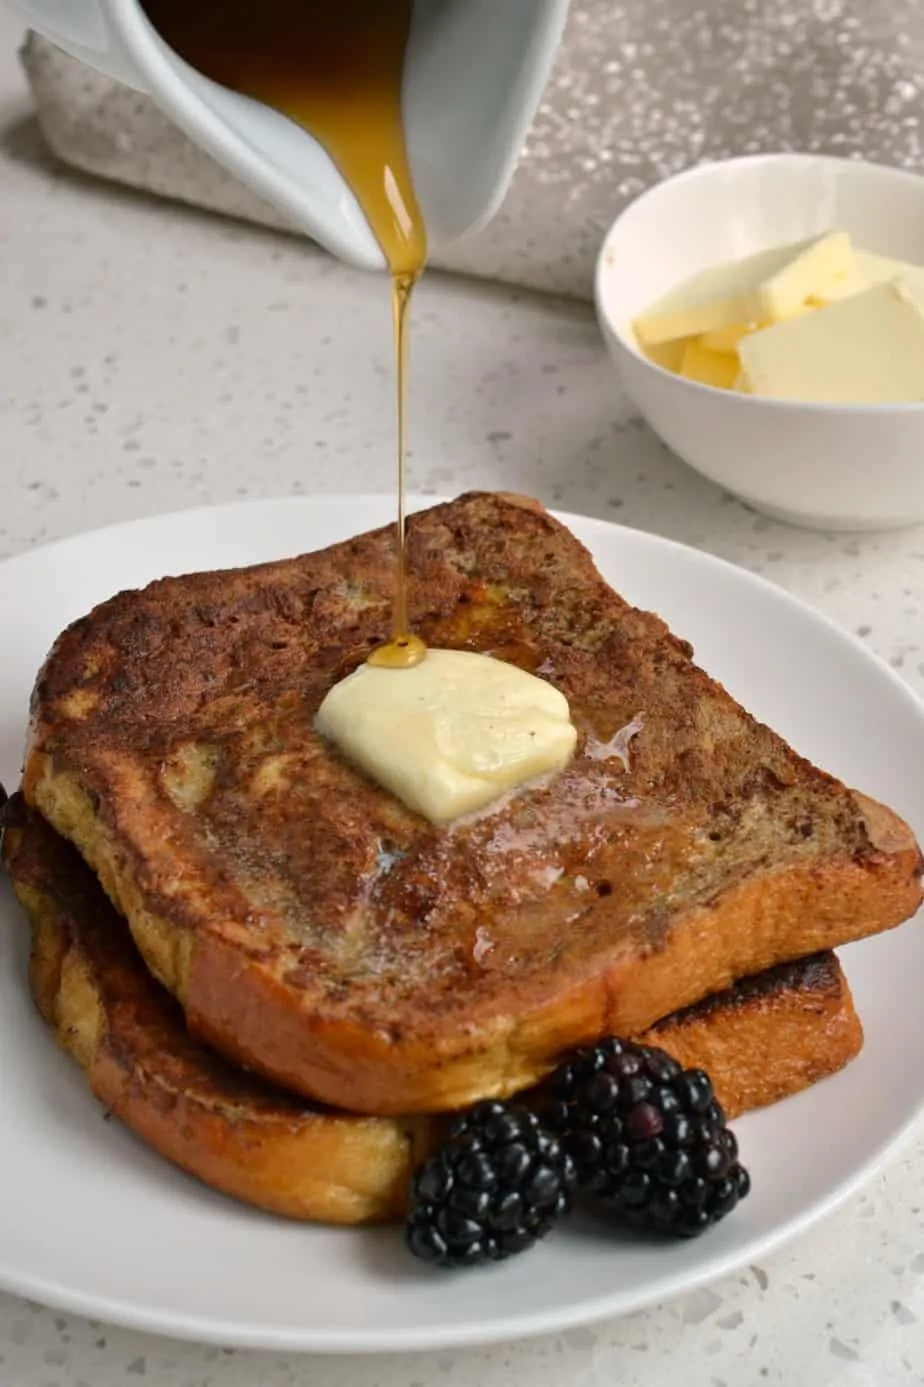 This French Toast Recipe brings brioche bread, eggs, milk, cinnamon, nutmeg, together for the ultimate breakfast. 